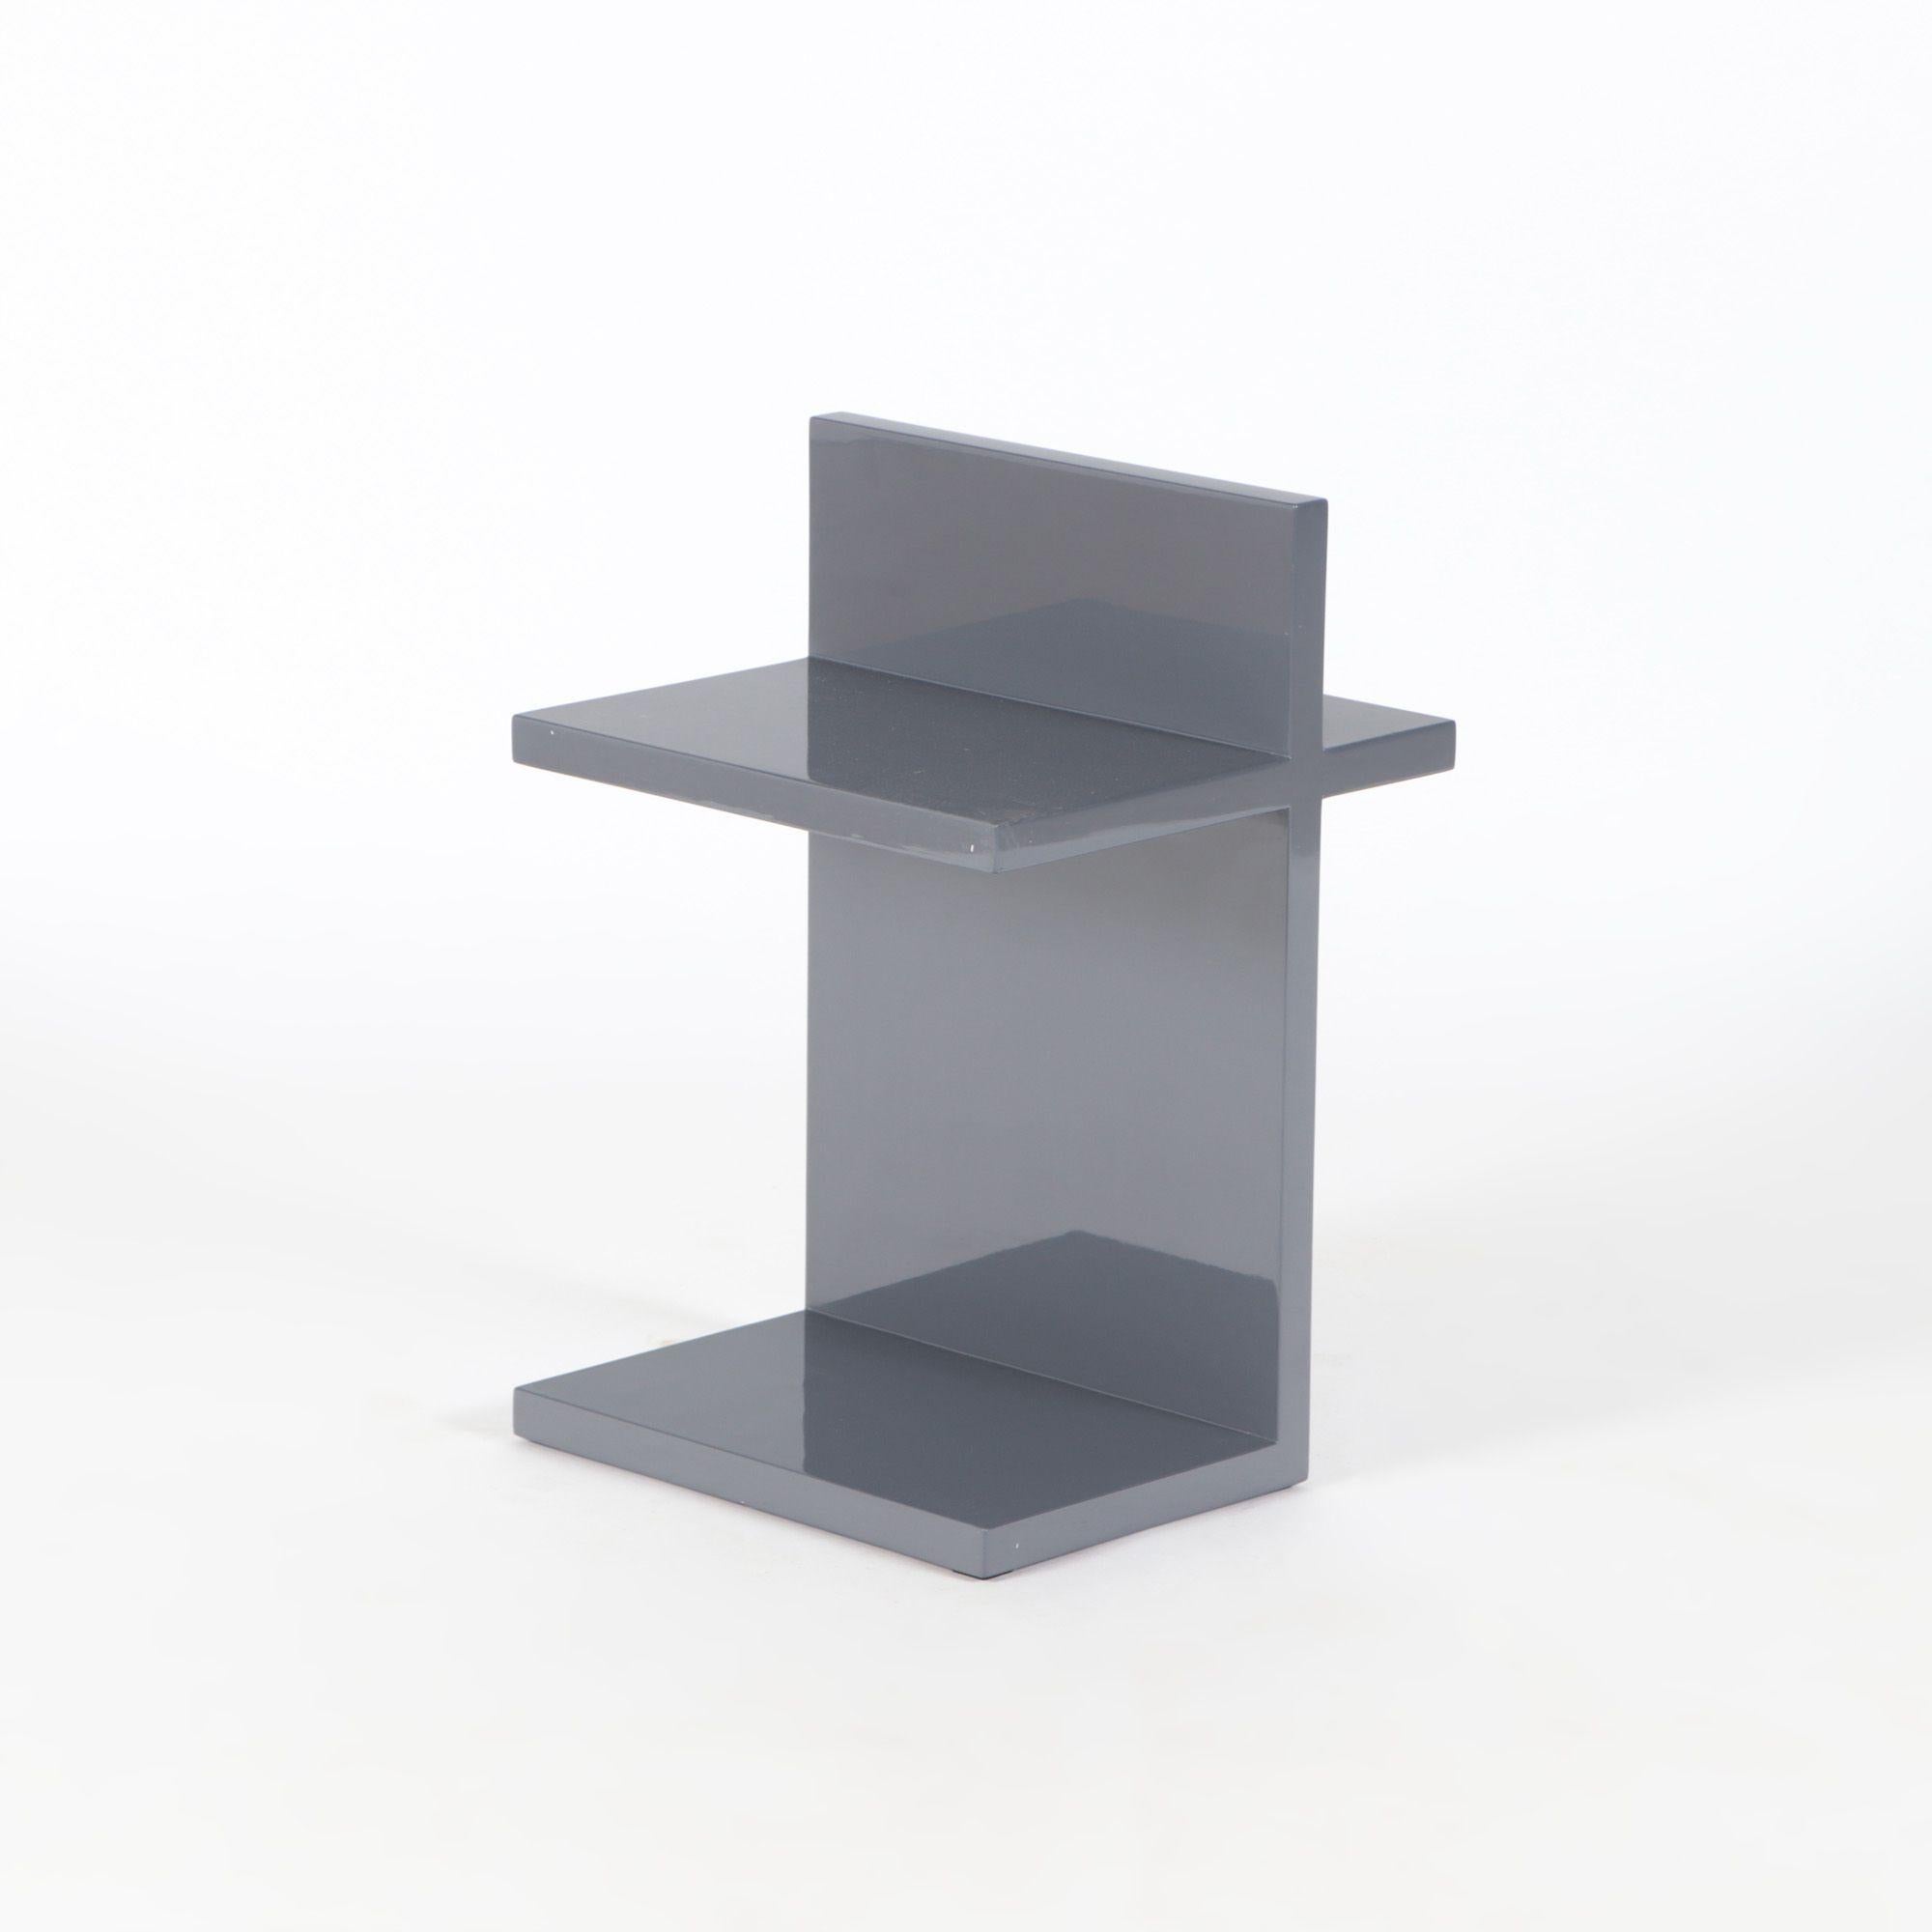 Designed by Maximilian Eicke for his brand Max ID NY.

These minimalistic side tables are made from Solid teak with high gloss lacquered slate grey finish.

Designed as part of its original collection in 2010, the designer being a tea lover (not